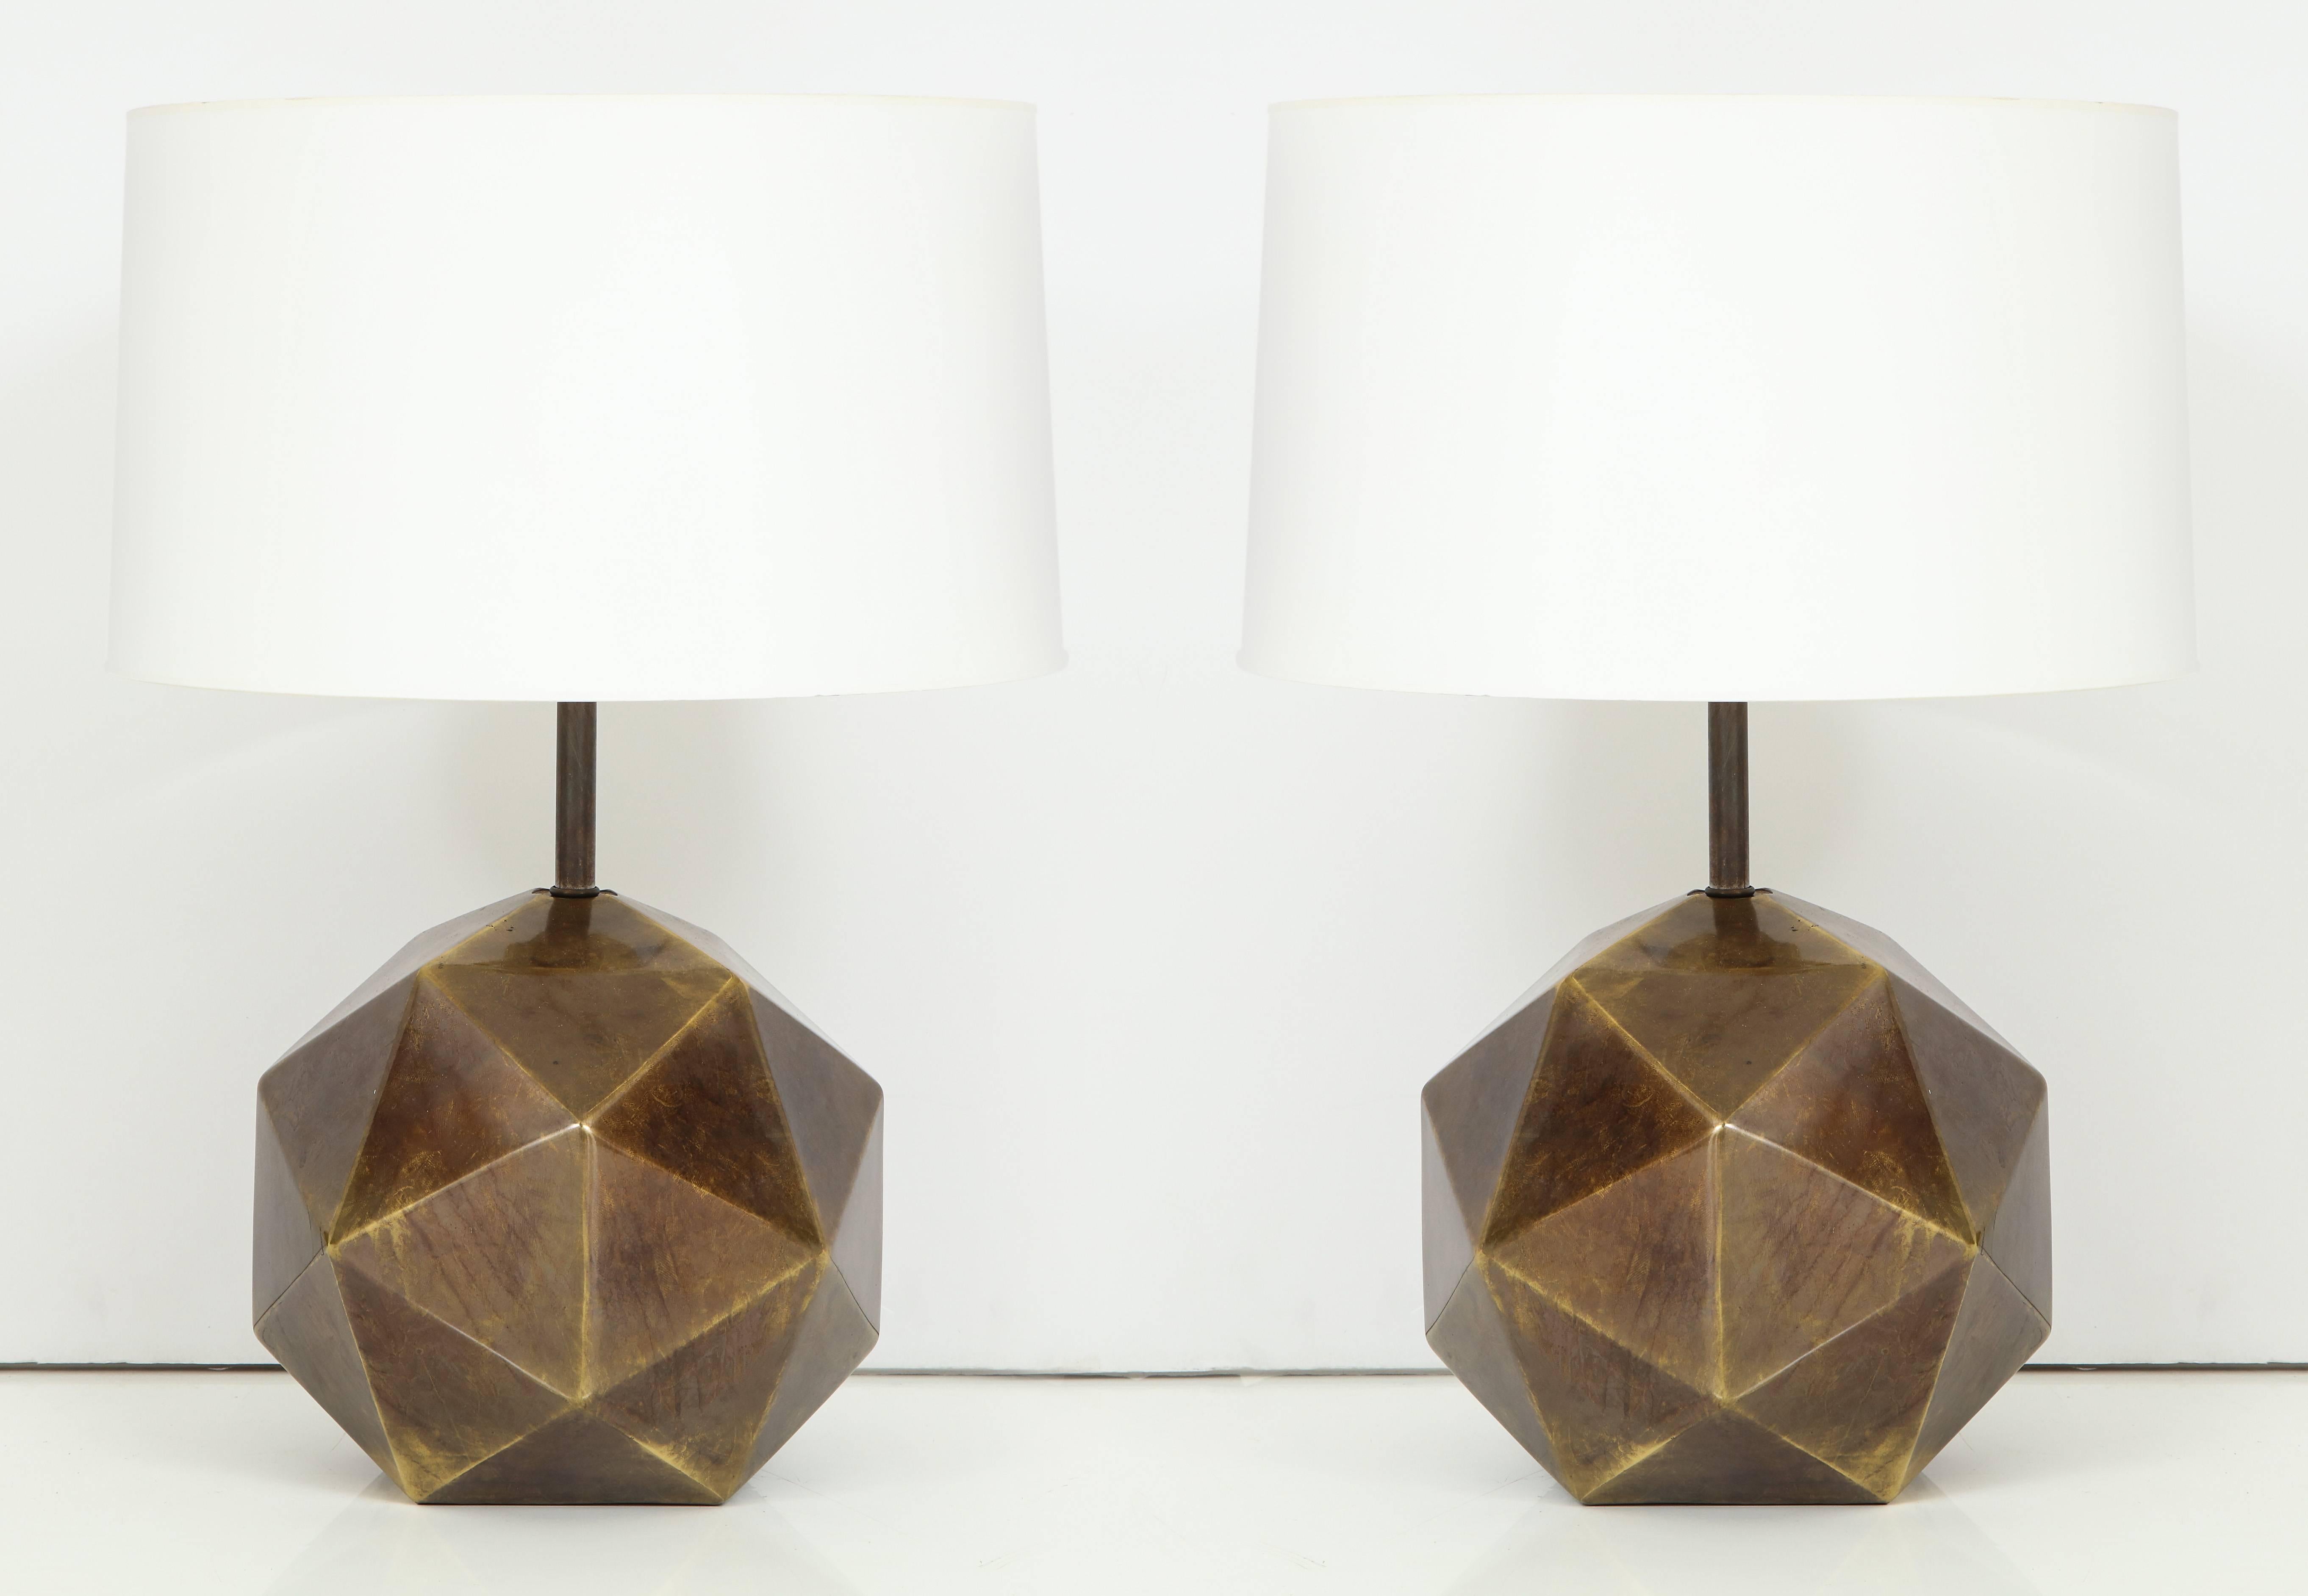 Bronze faceted Westwood lamps, signed. Finely crafted table lamps with original lacquered bronze finish. Both lamps are signed: Westwood industries 1978 on clear cellophane label about the exit cord in the rear of the lamp. Each measures: 9 inches